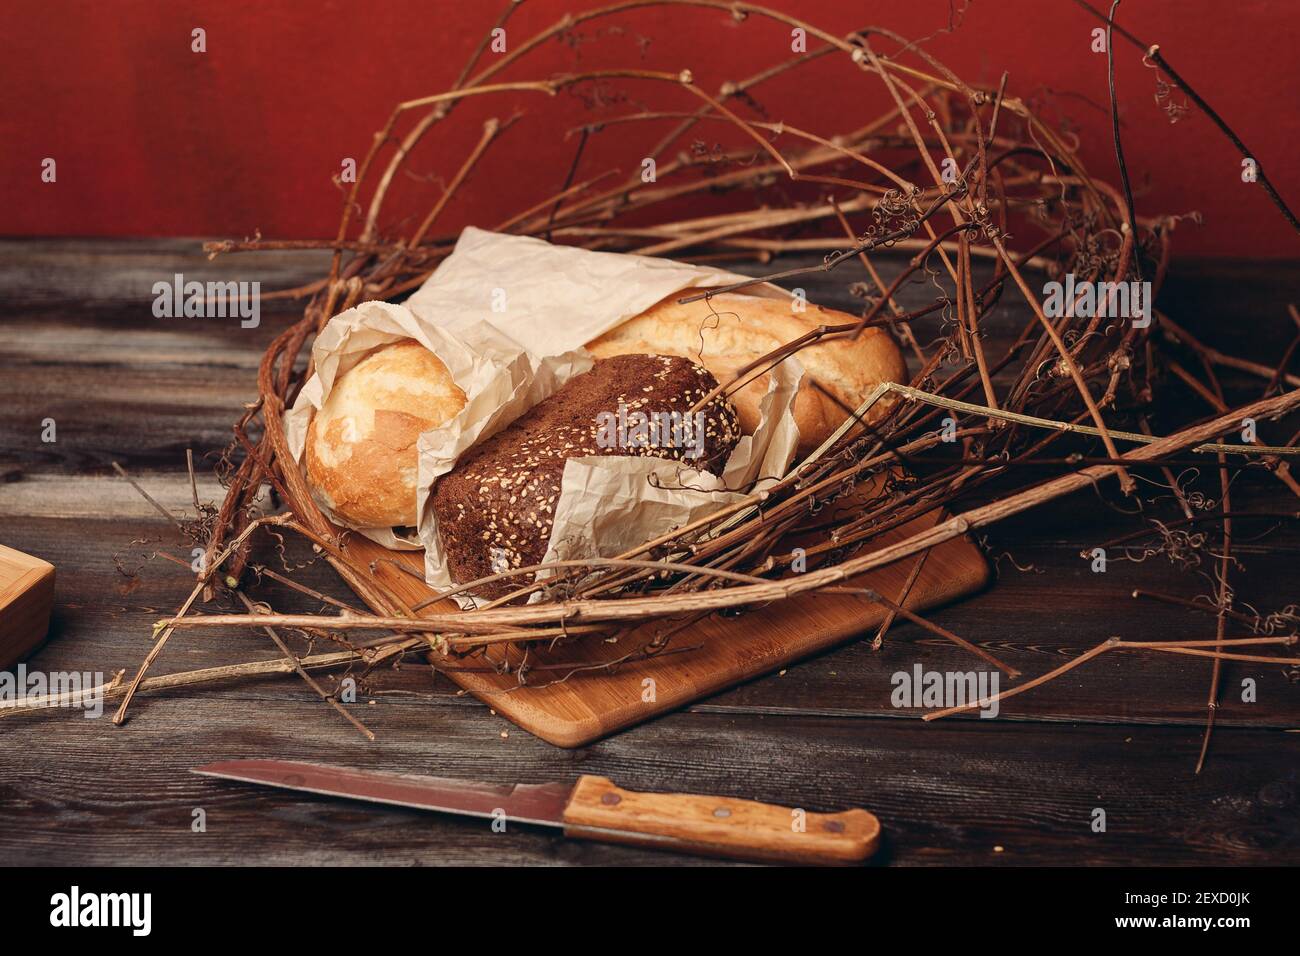 a loaf of fresh bread flour product in a bird's nest on a wooden